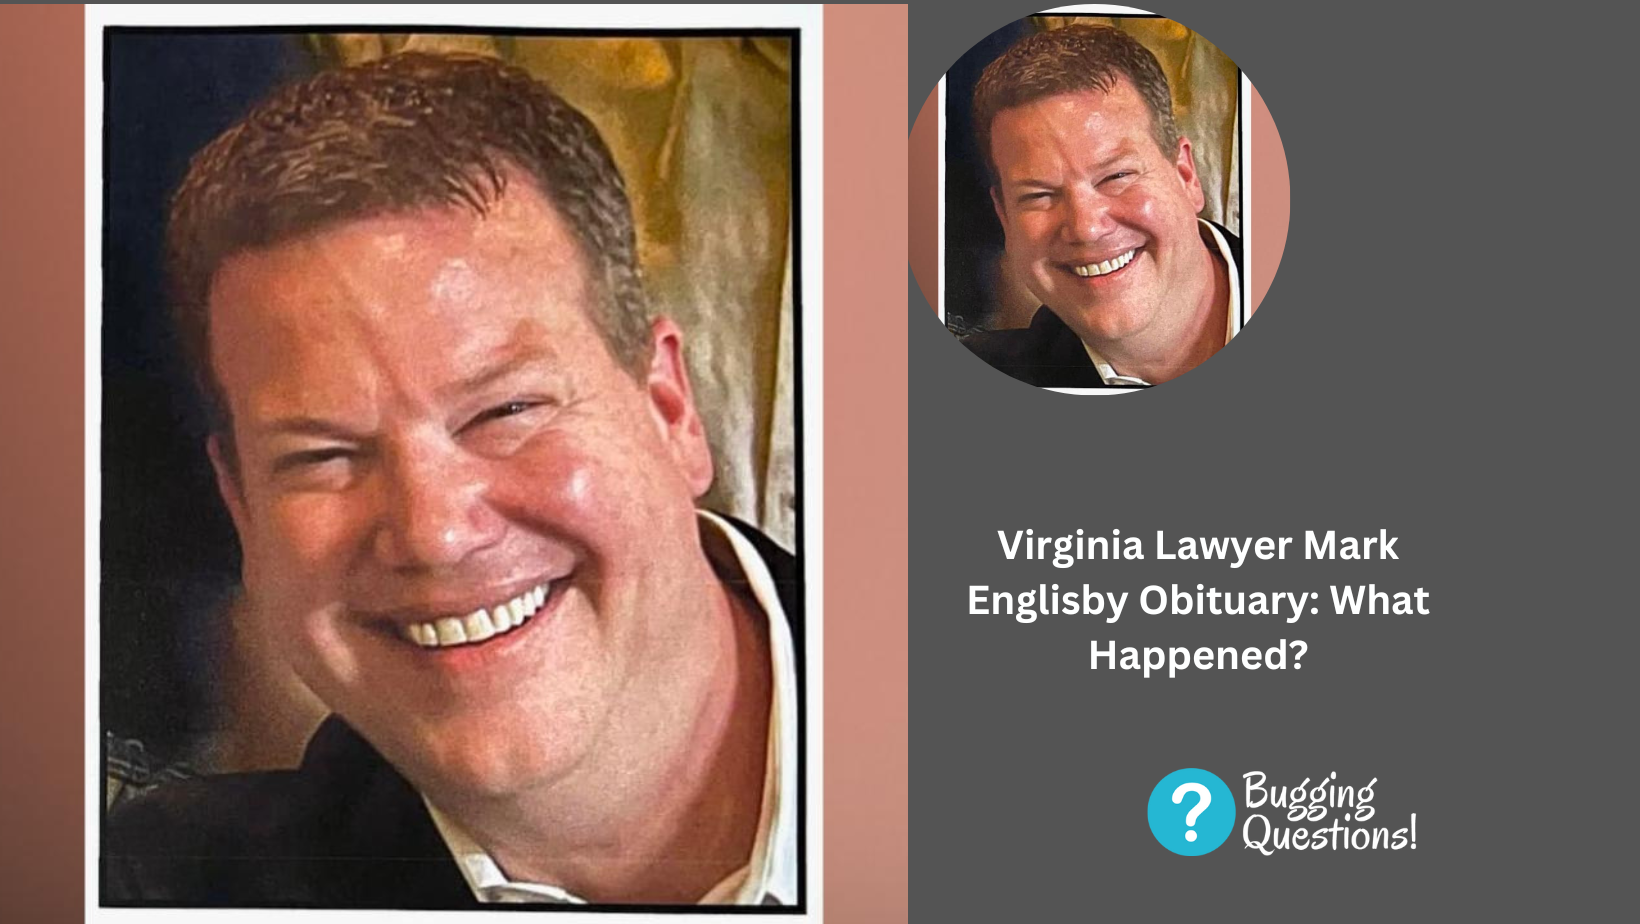 Virginia Lawyer Mark Englisby Obituary: What Happened?